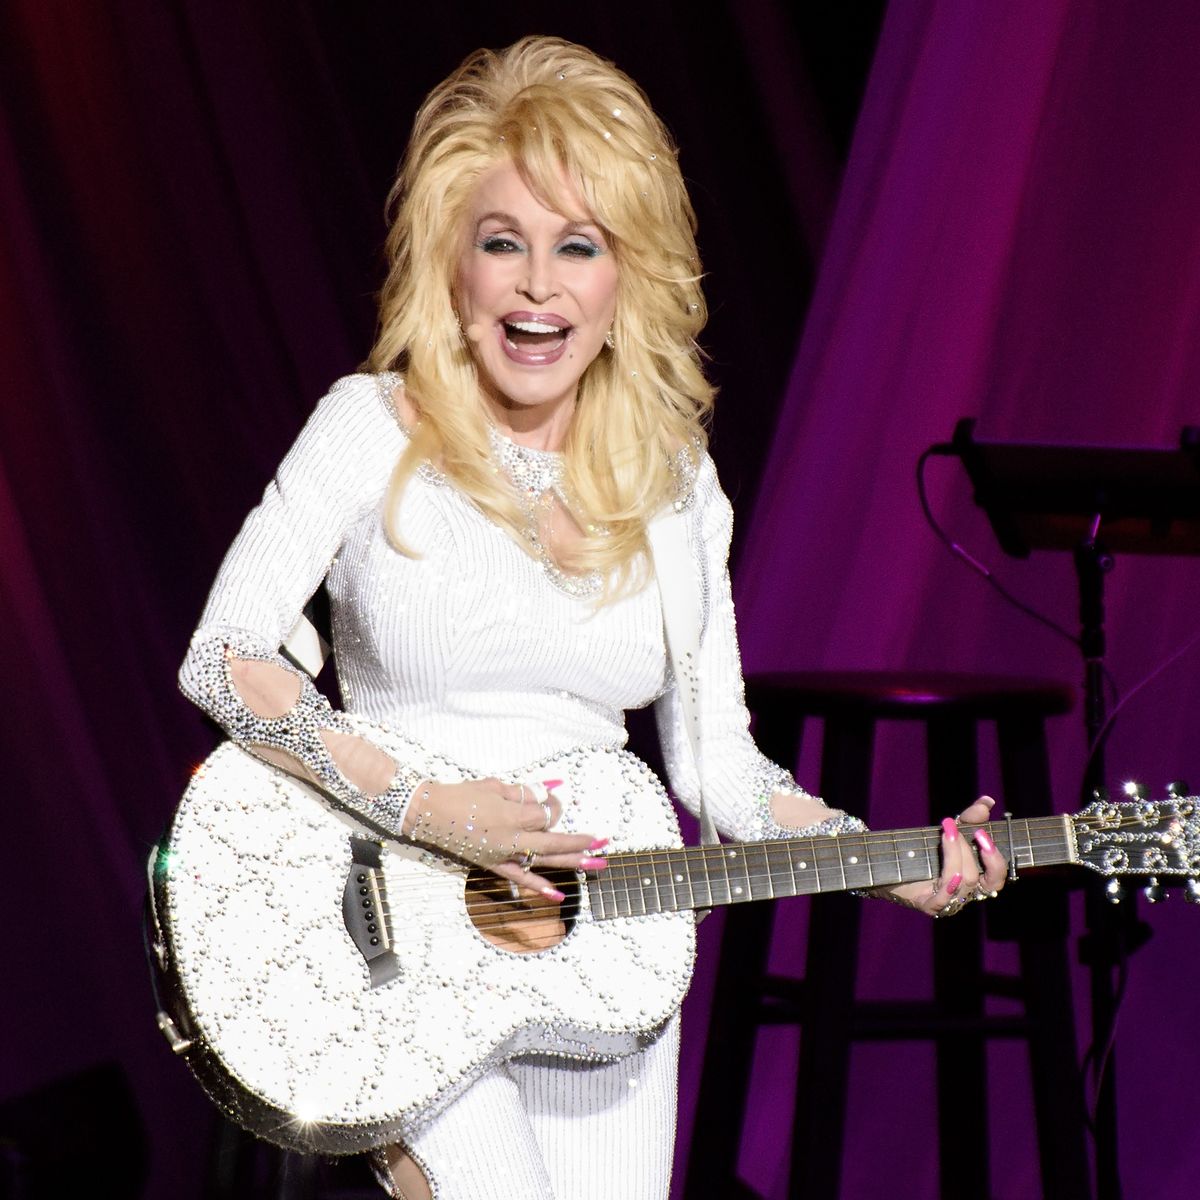 dolly parton in concert during the 2016 ravinia fesival highland park, illinois